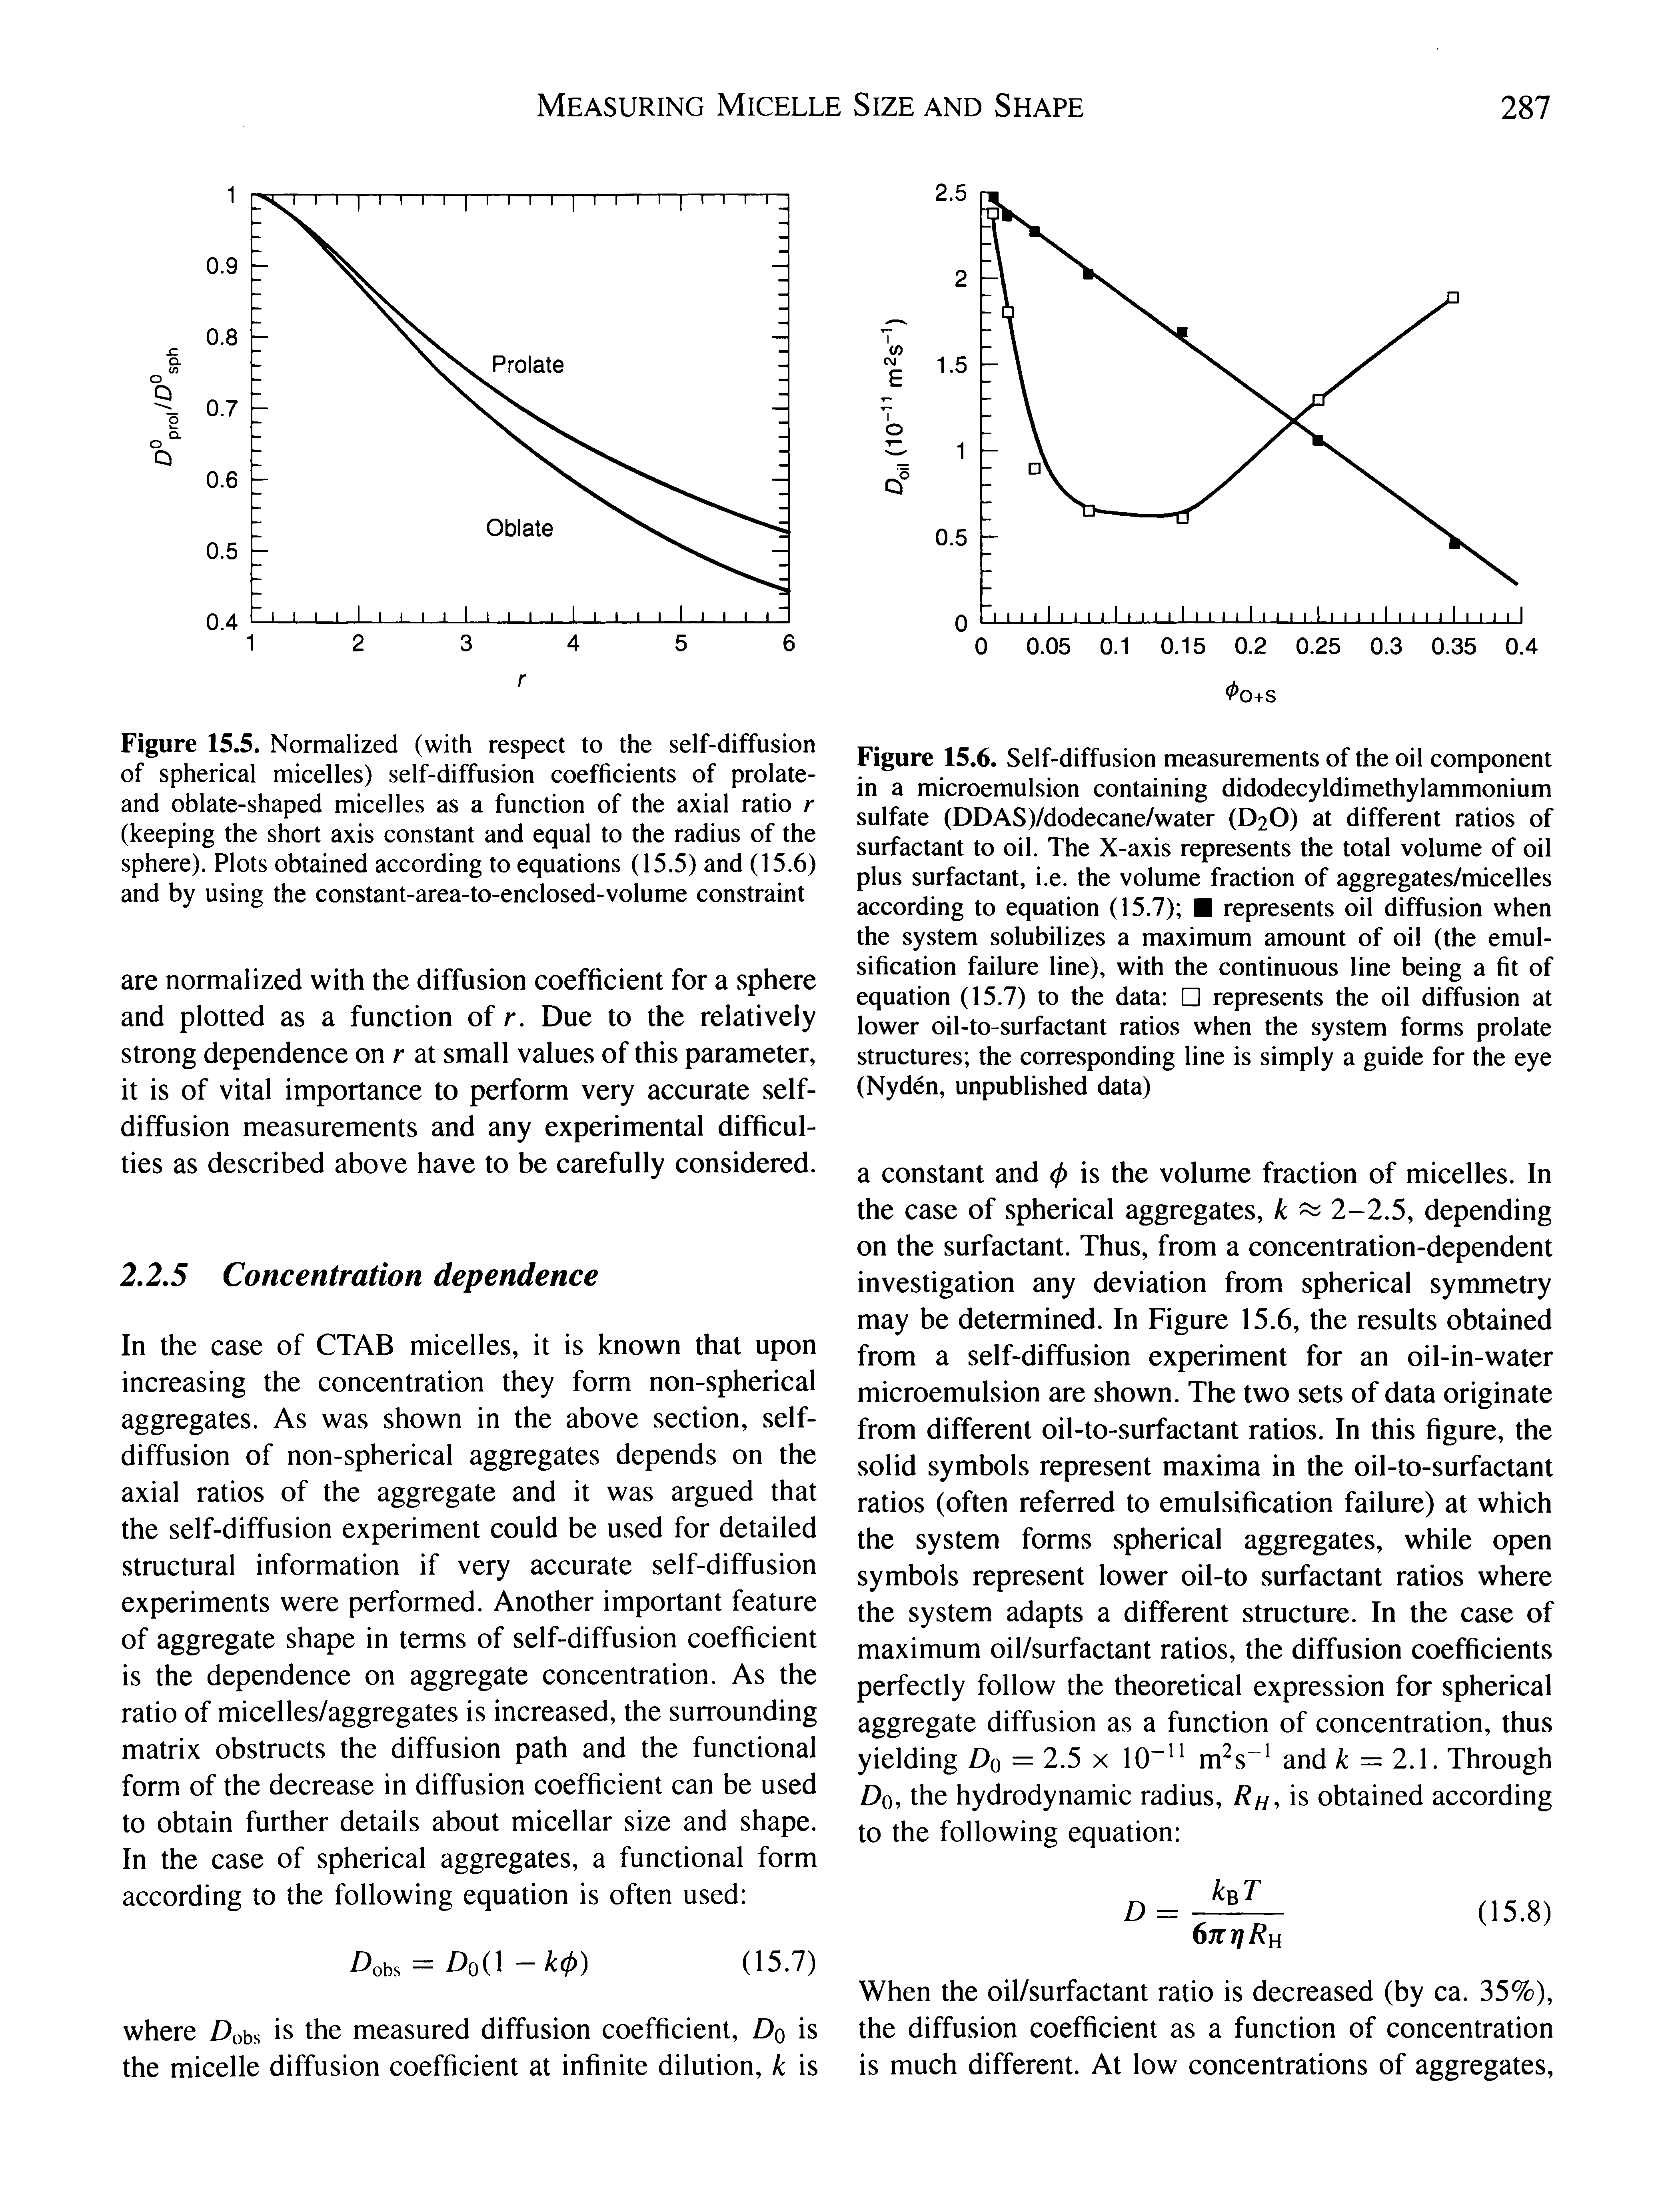 Figure 15.5. Normalized (with respect to the self-diffusion of spherical micelles) self-diffusion coefficients of prolate-and oblate-shaped micelles as a function of the axial ratio r (keeping the short axis constant and equal to the radius of the sphere). Plots obtained according to equations (15.5) and (15.6) and by using the constant-area-to-enclosed-volume constraint...